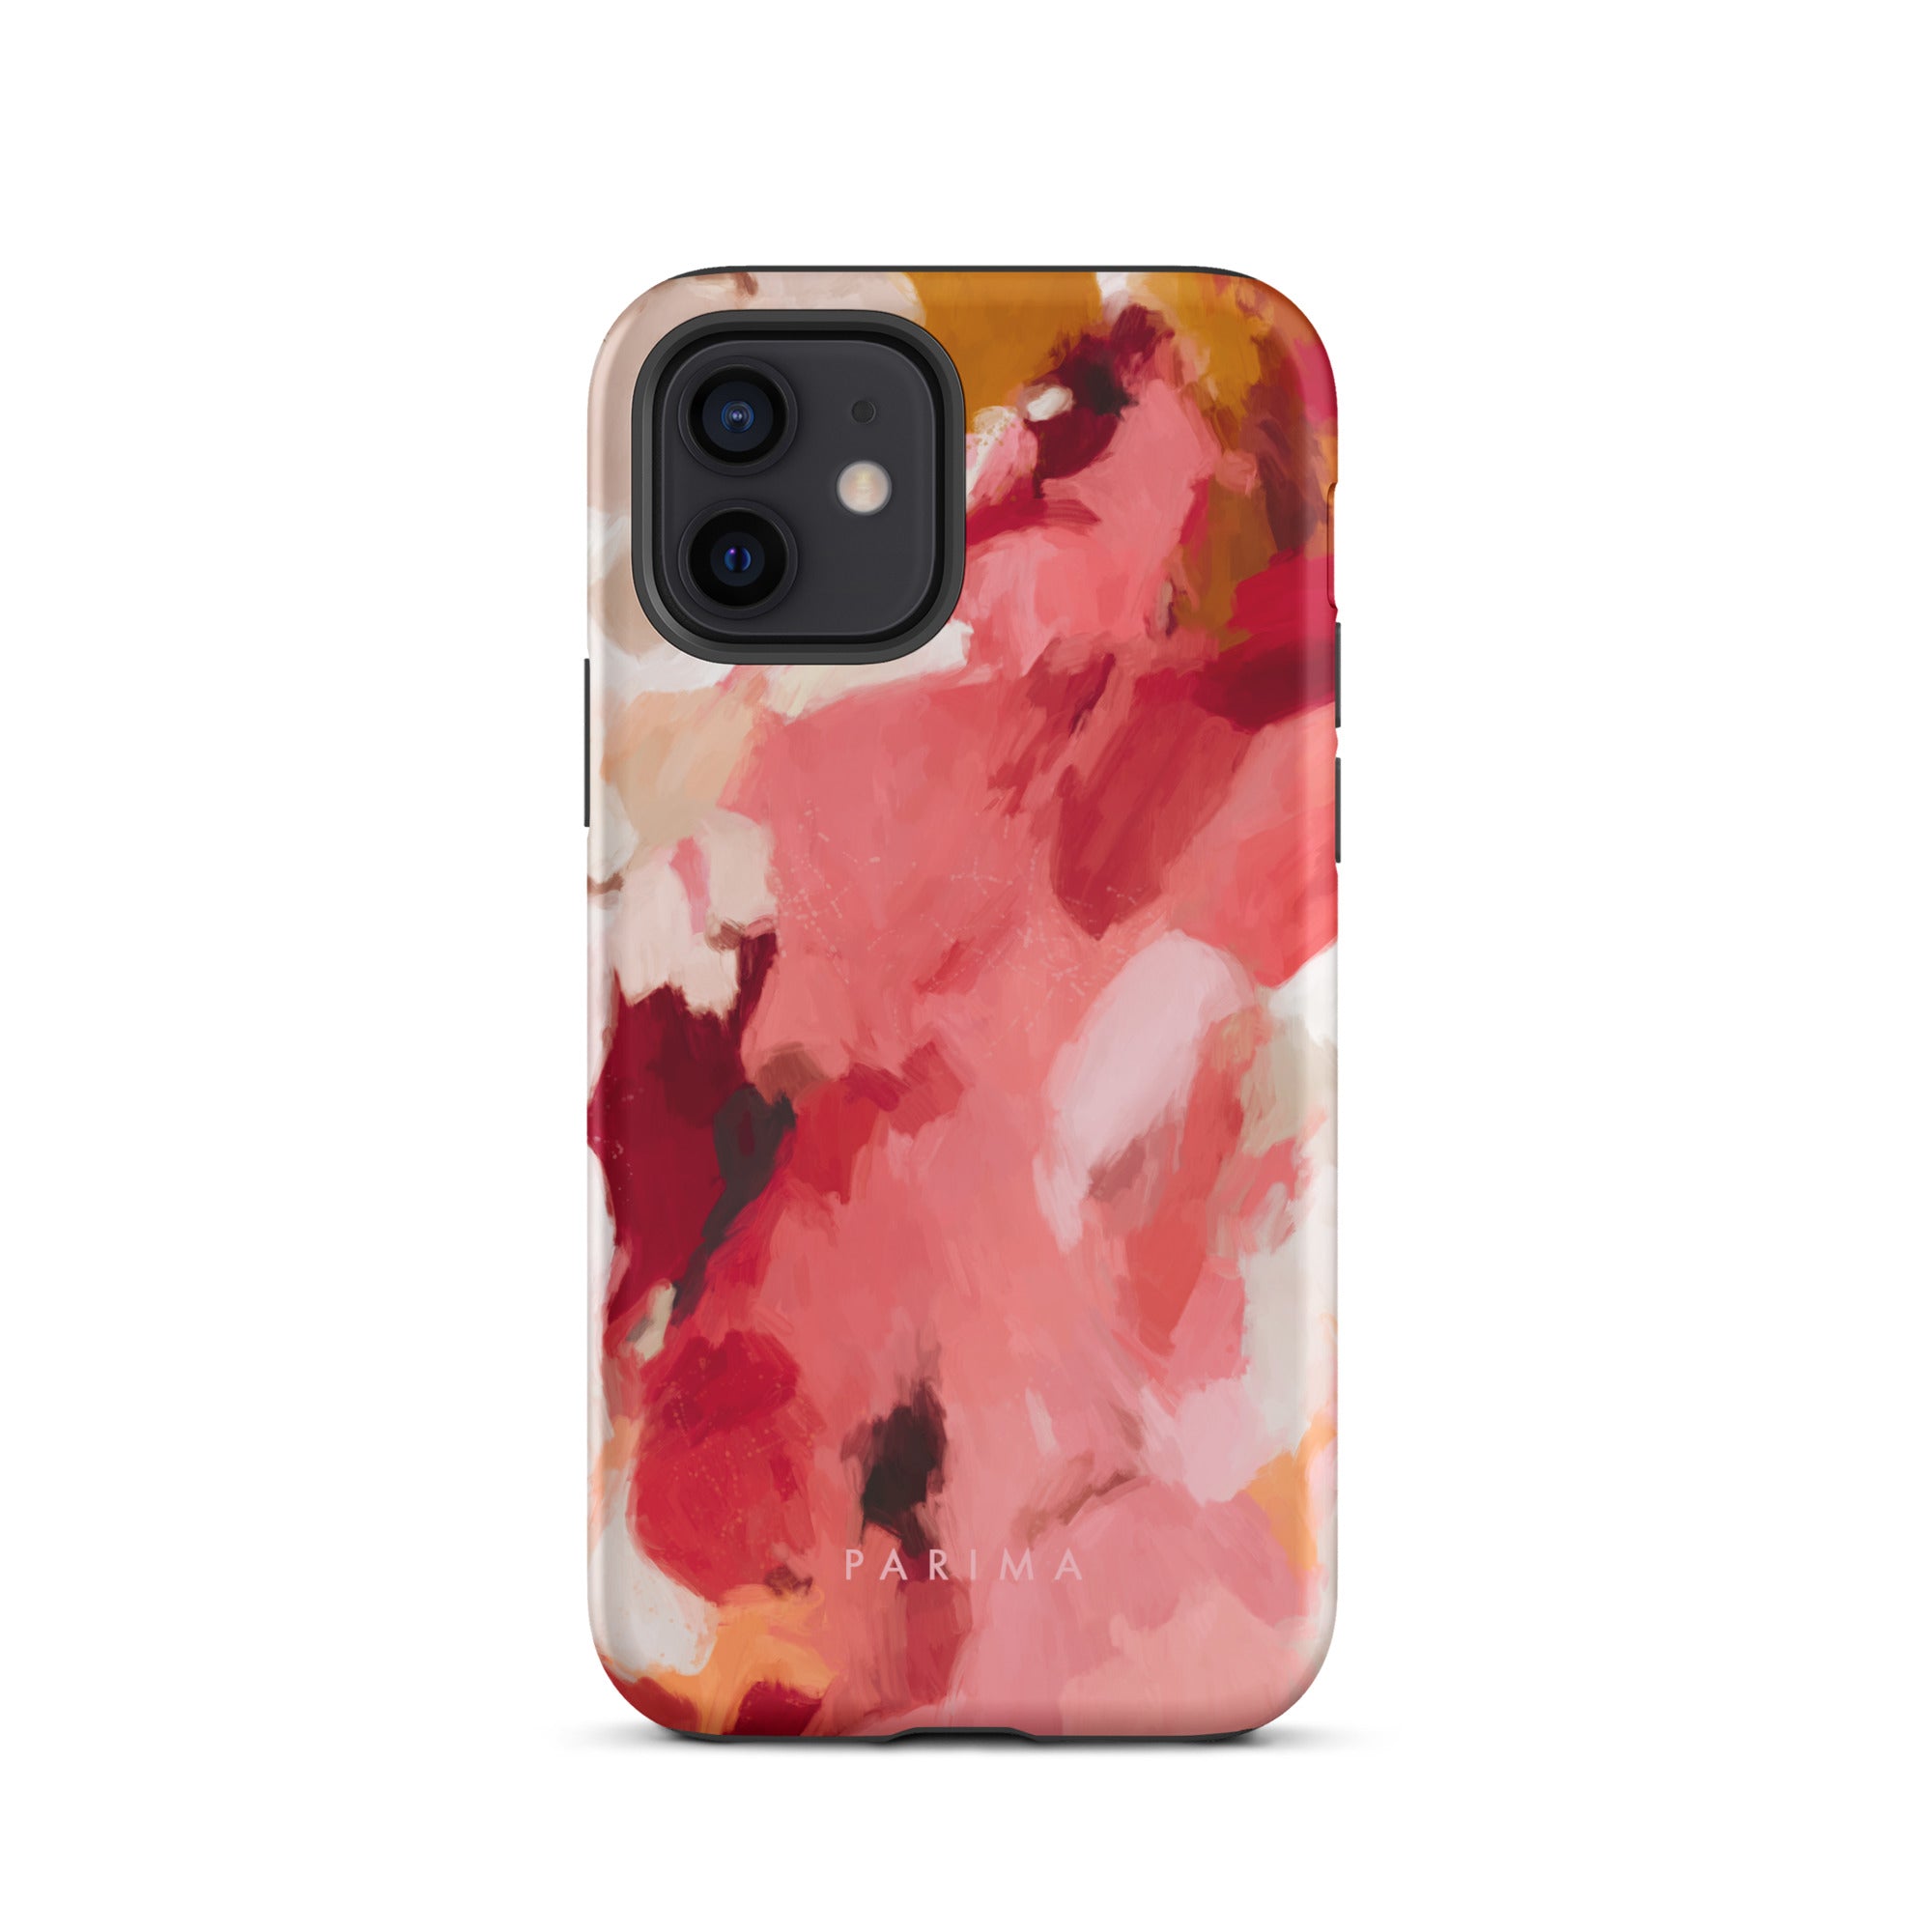 Apple, red and pink abstract art - iPhone 12 tough case by Parima Studio